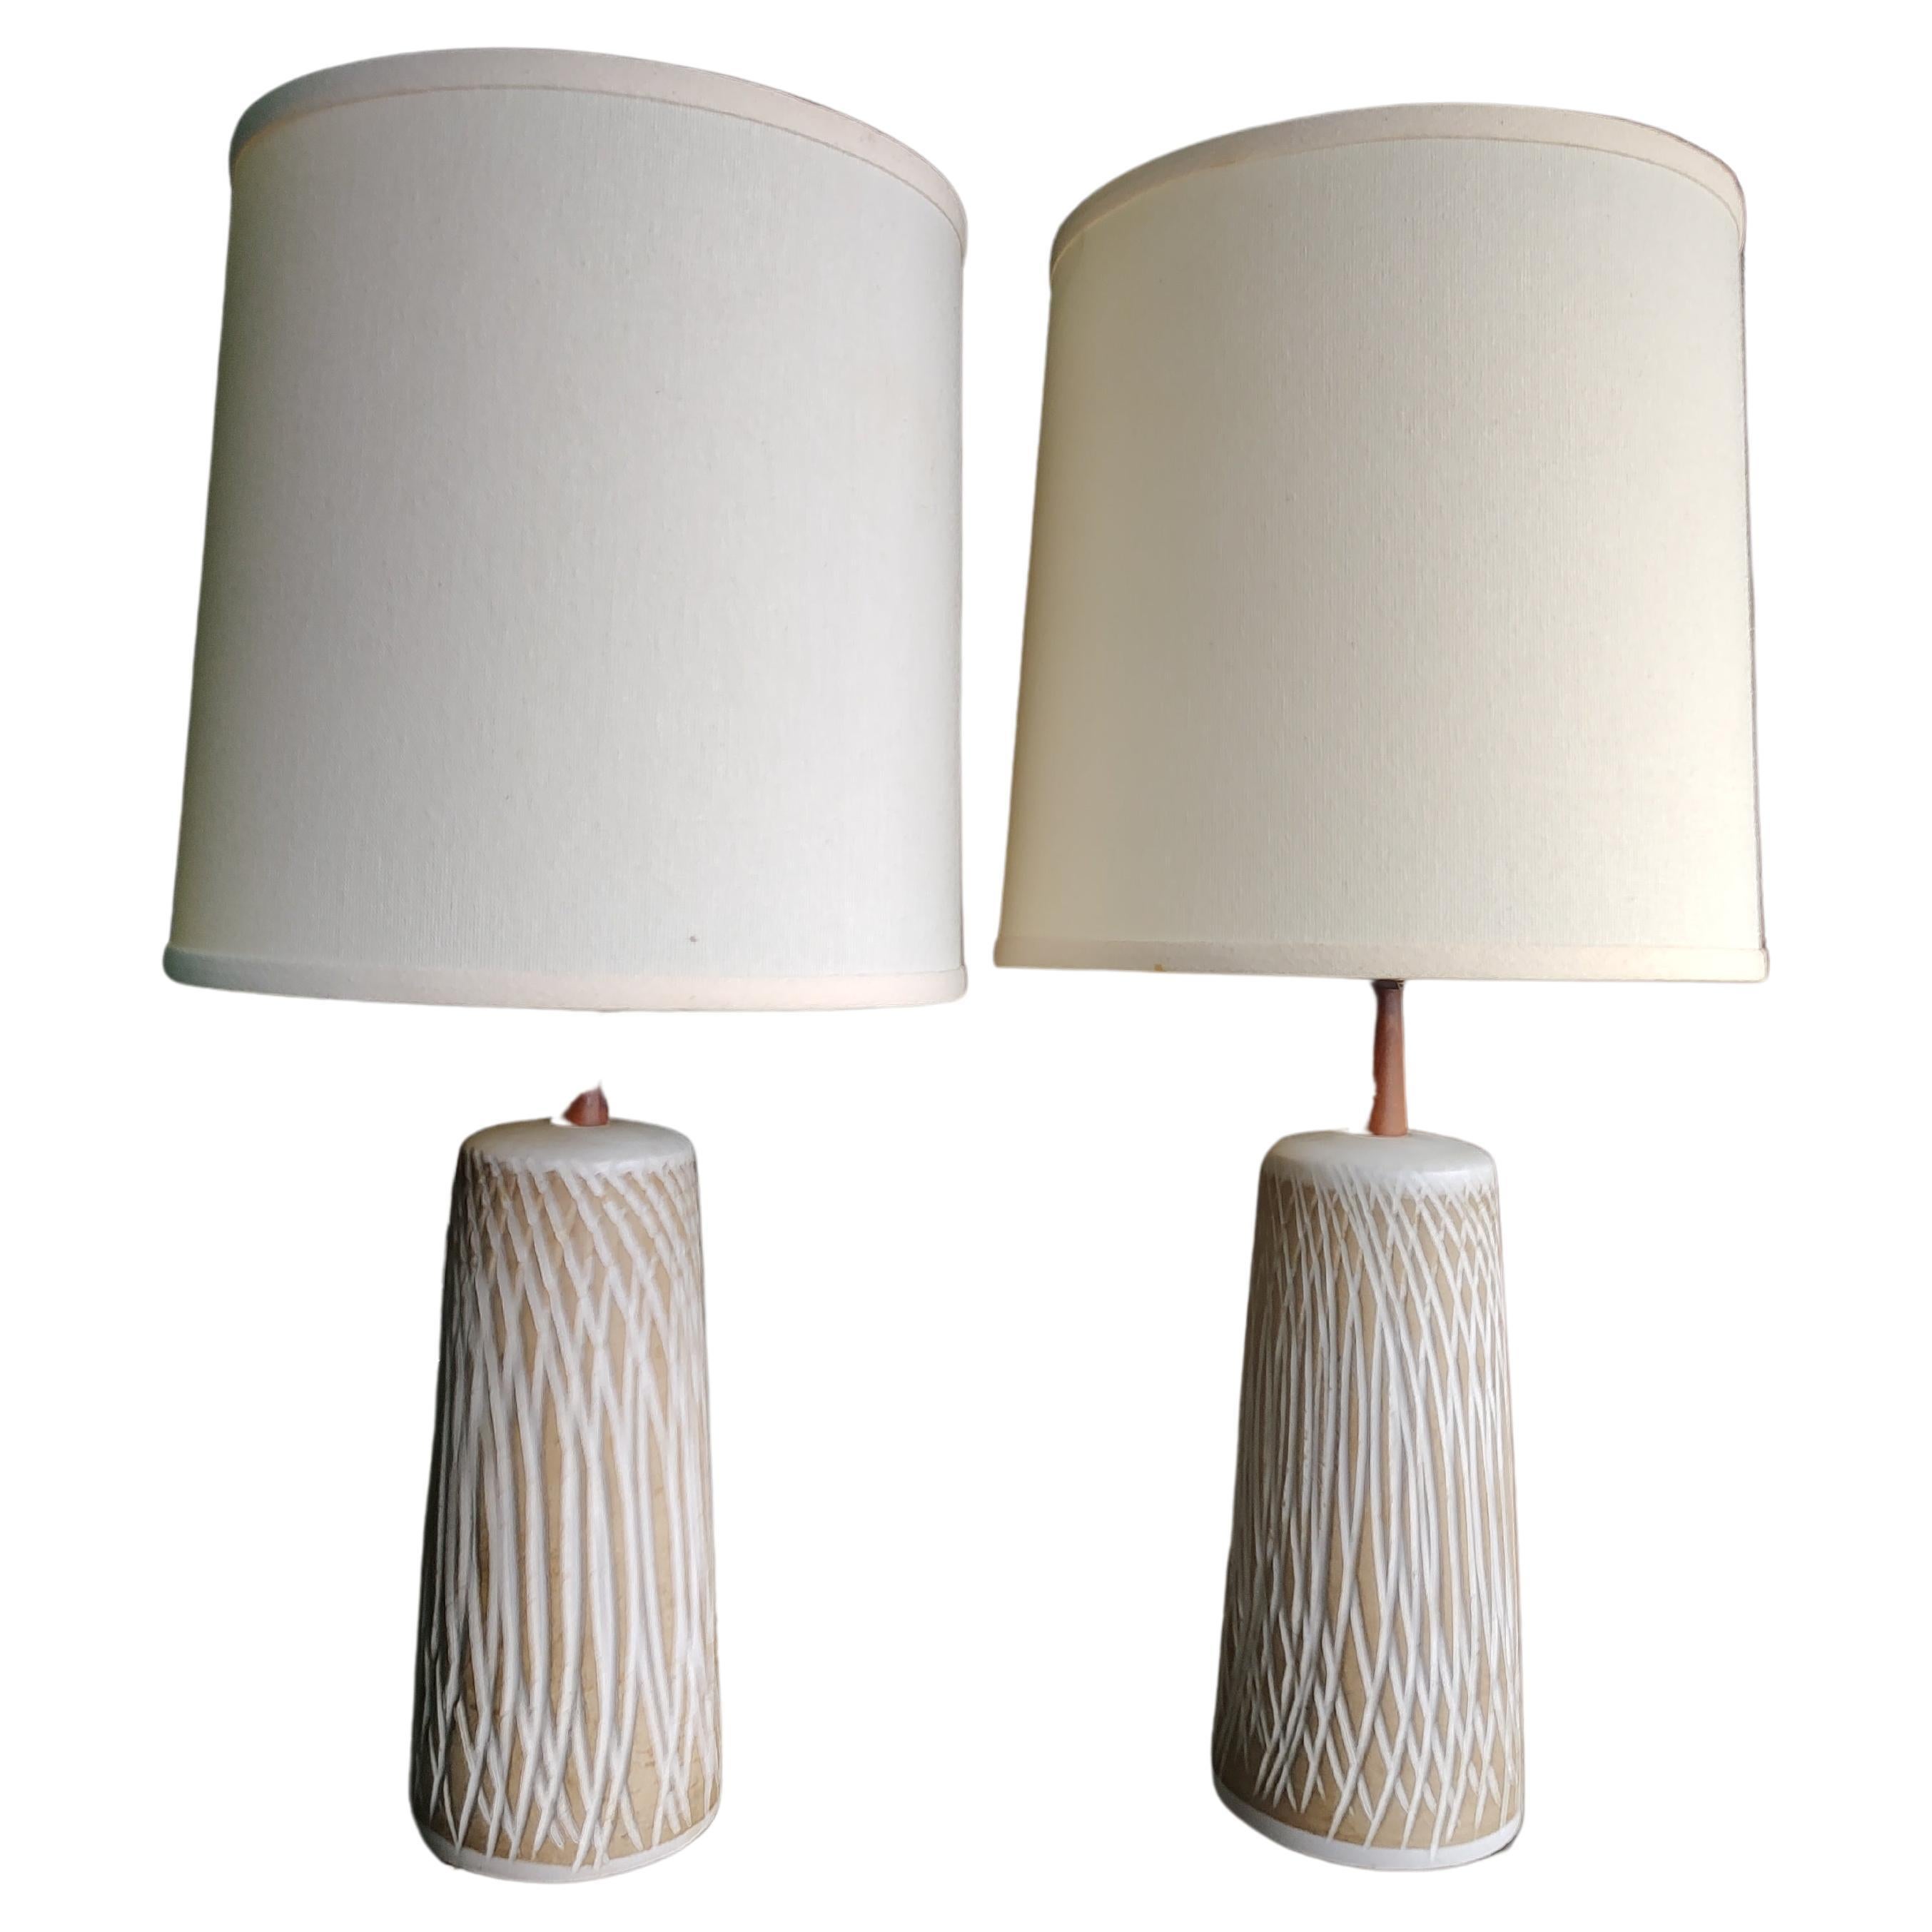 Pair Mid-Century Modern Table Lamps by Gordon & Jane Martz with Original Shades For Sale